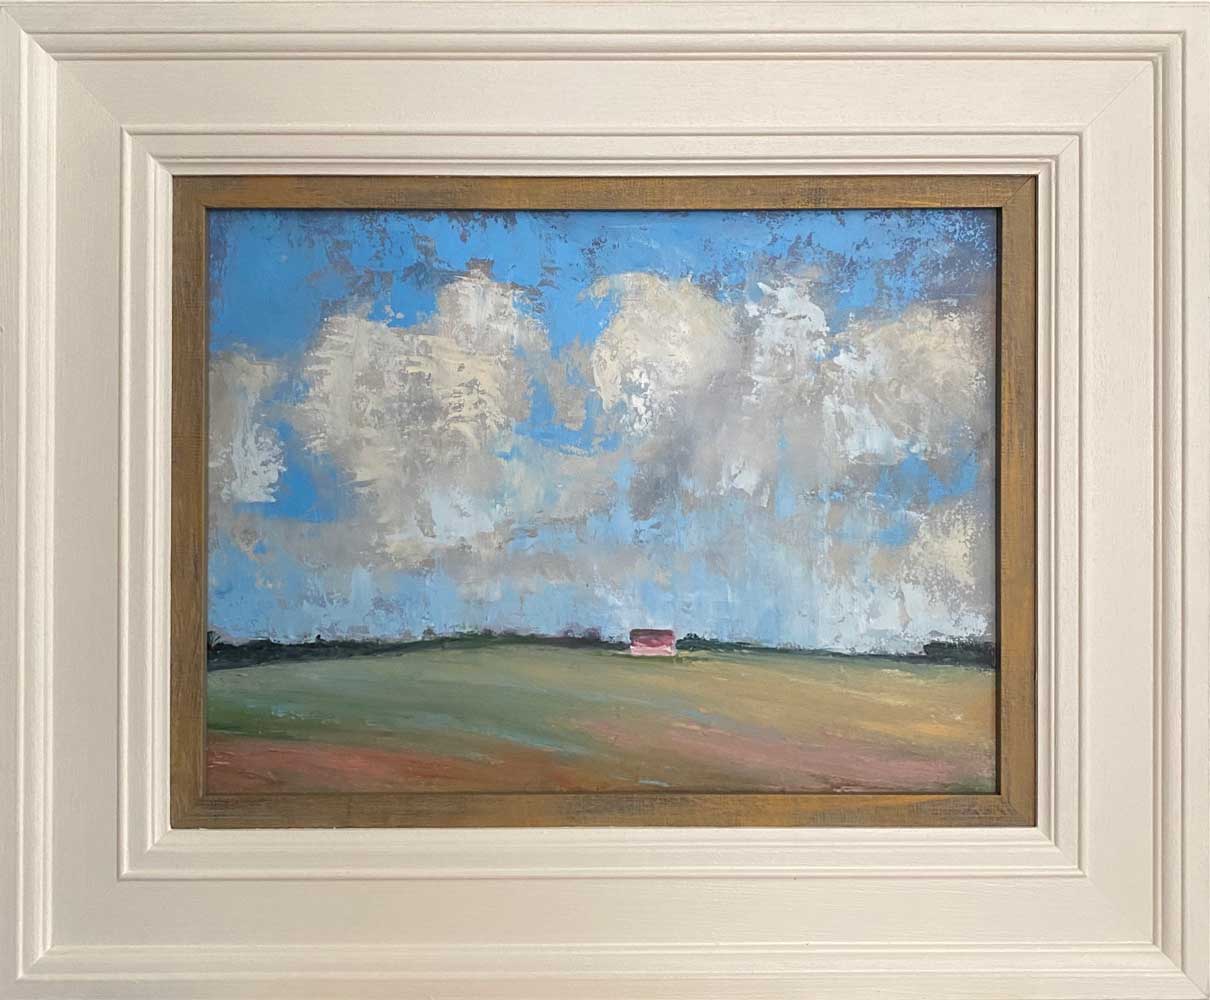 THE RED SHED BENEATH THE ROLLING CLOUDS - oil painting